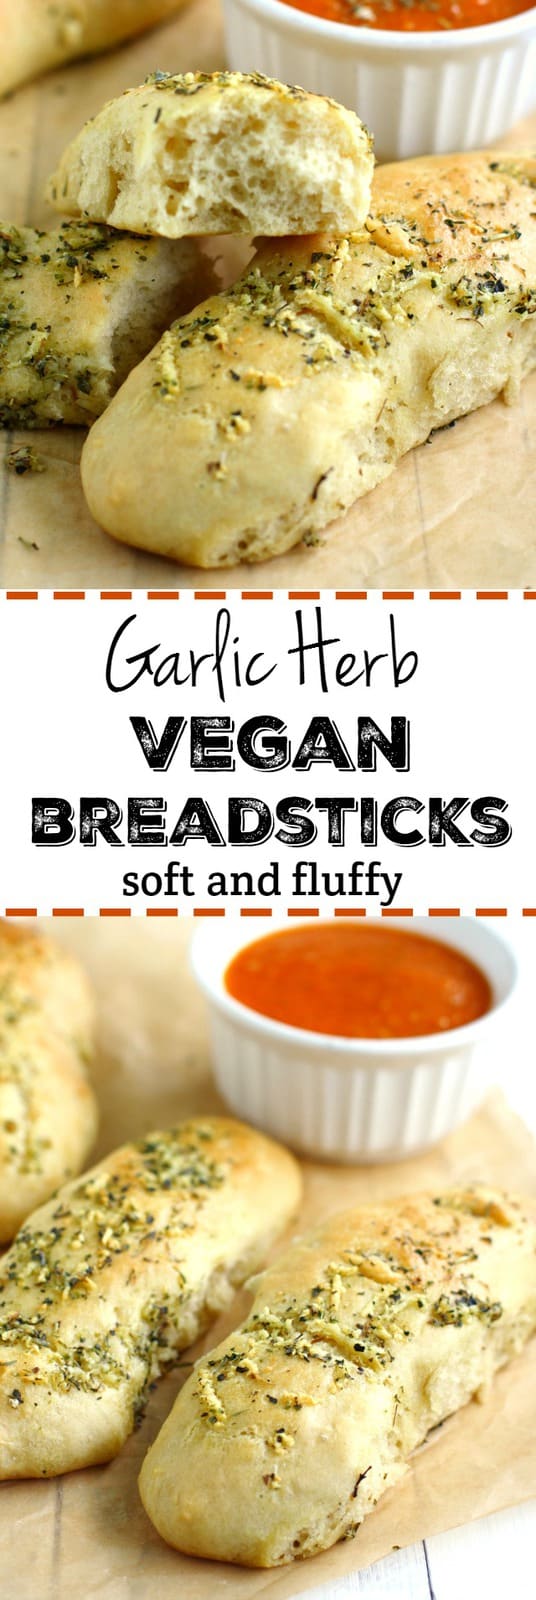 These soft and fluffy vegan garlic herb breadsticks are easy to make in a hurry! They are just right with pasta or soup and salad. A family favorite! #vegan #dairyfree